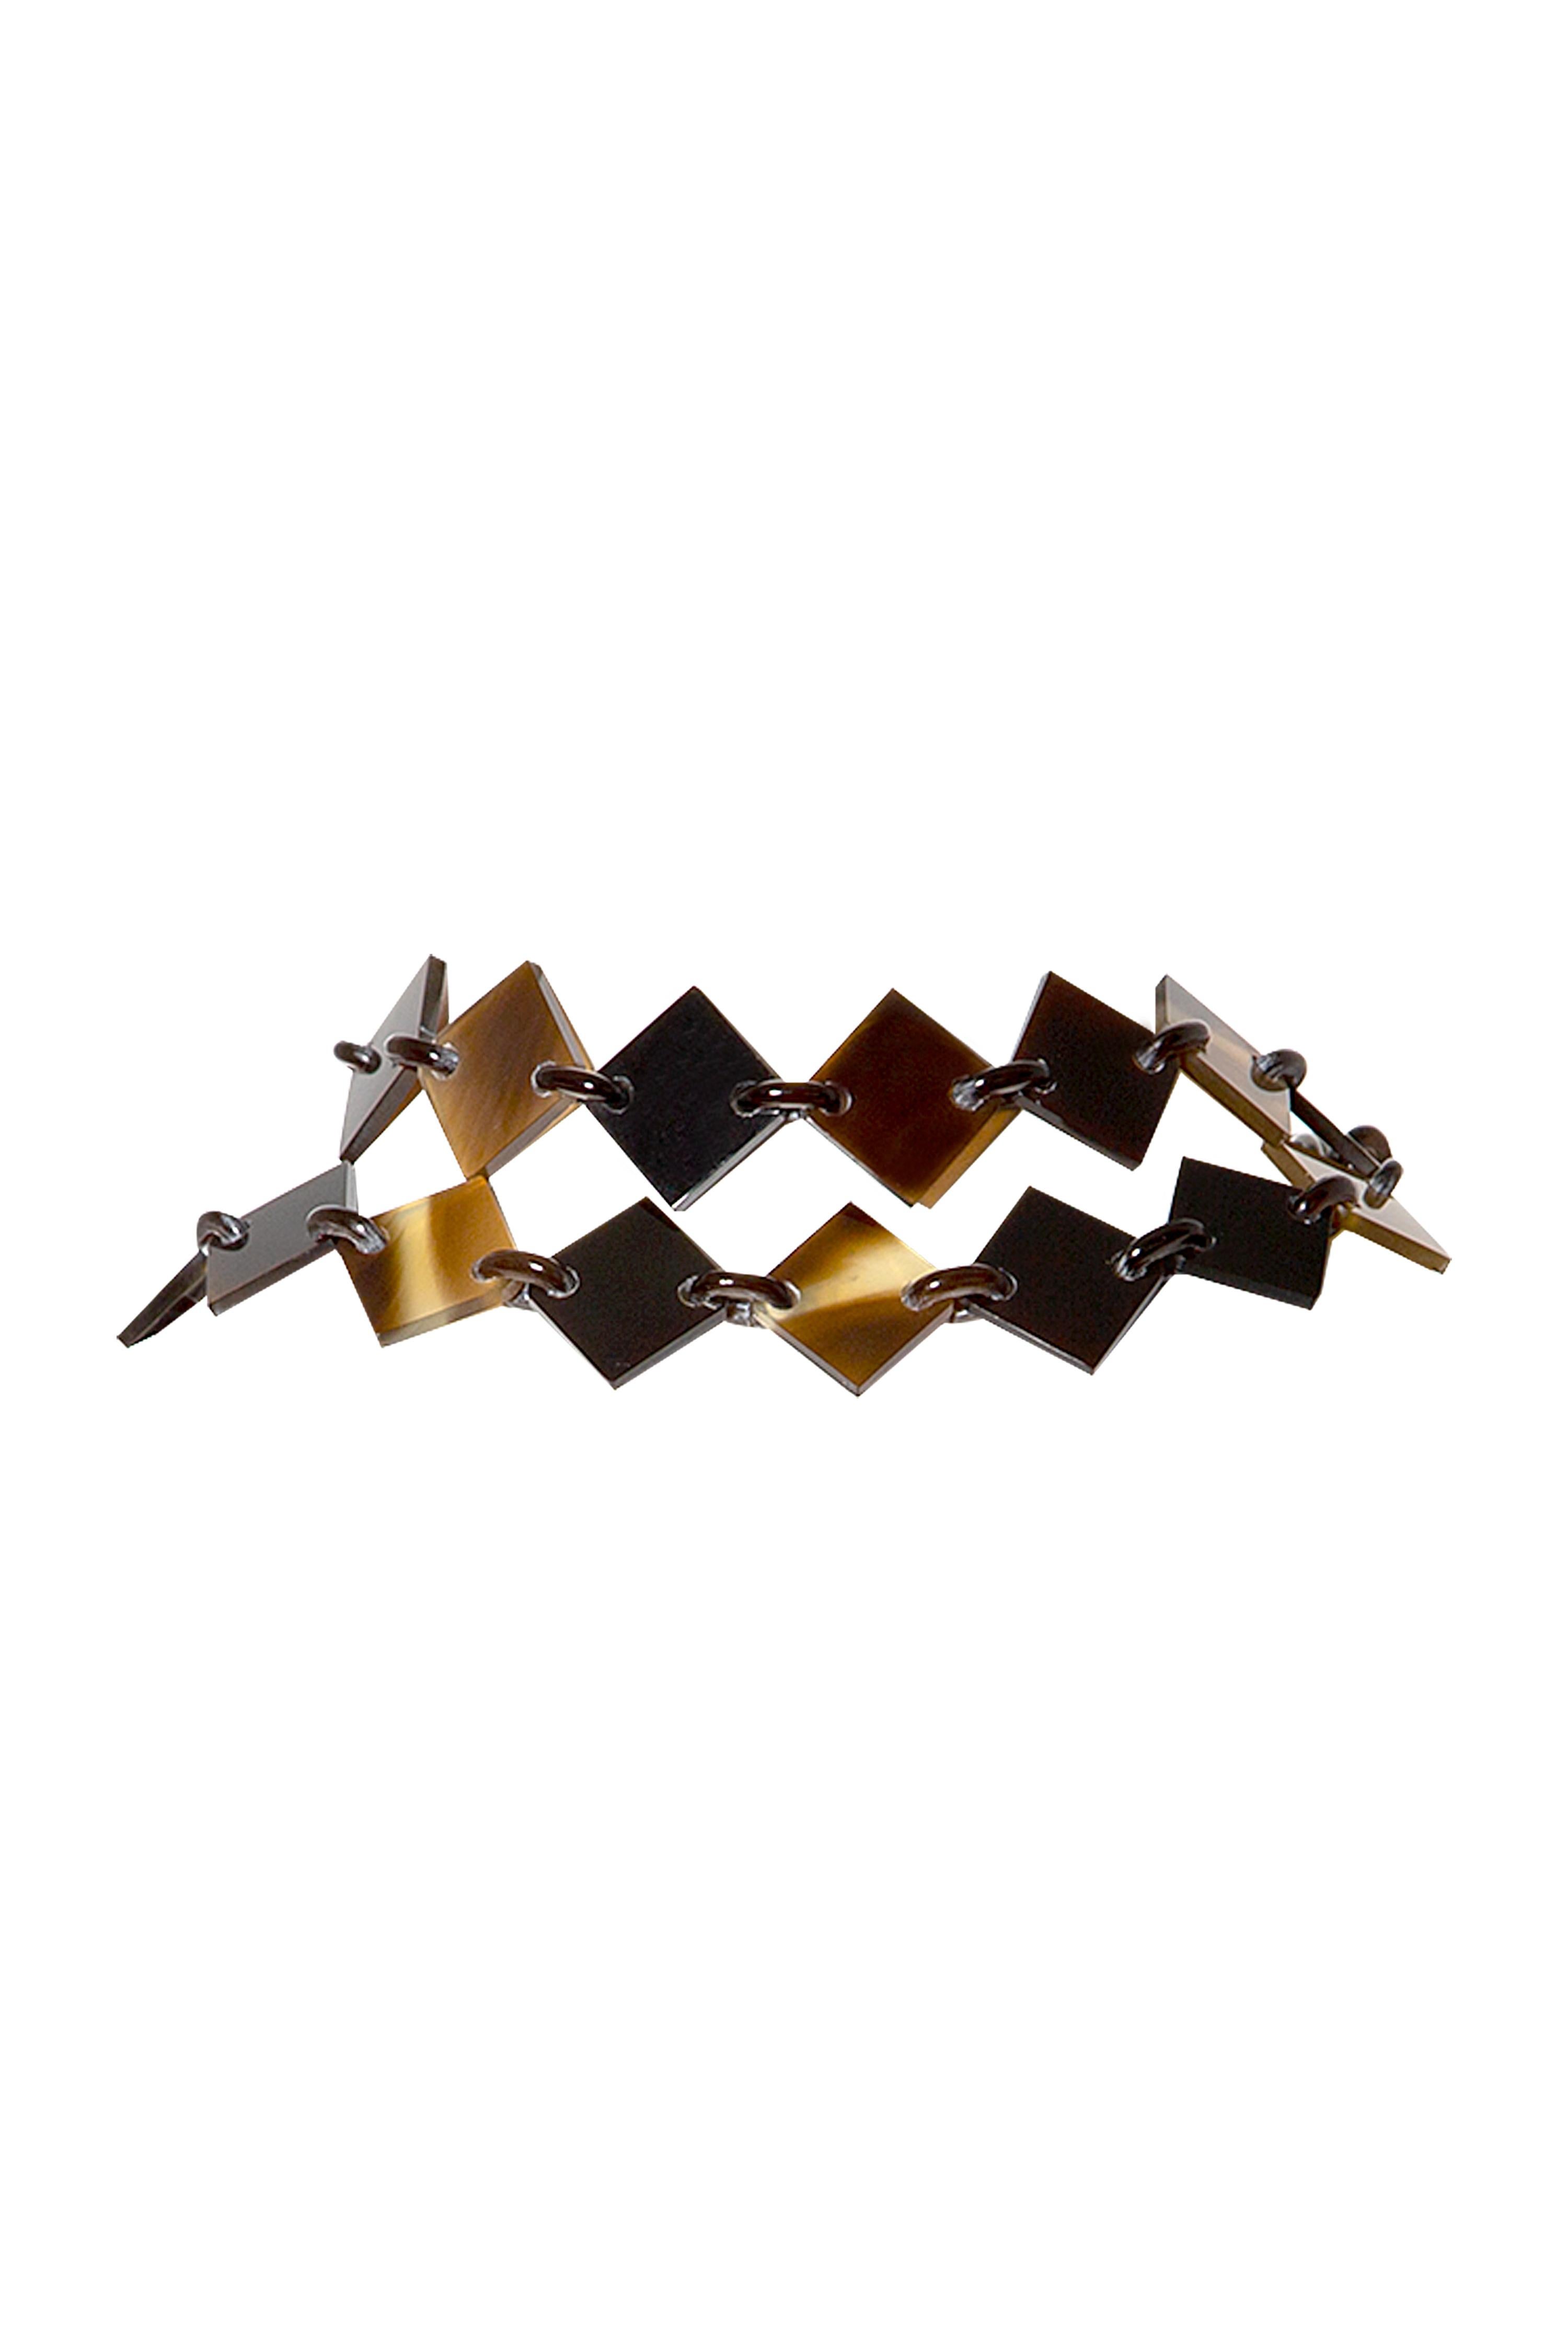 Discover the stunning craftsmanship of the Lena Necklace from Hermès.

•Made from buffalo horn, creating a beautifully unique and natural look
•Brown and purple bright colours
•Comes with a dustbag and a box
•Excellent condition

Note that the